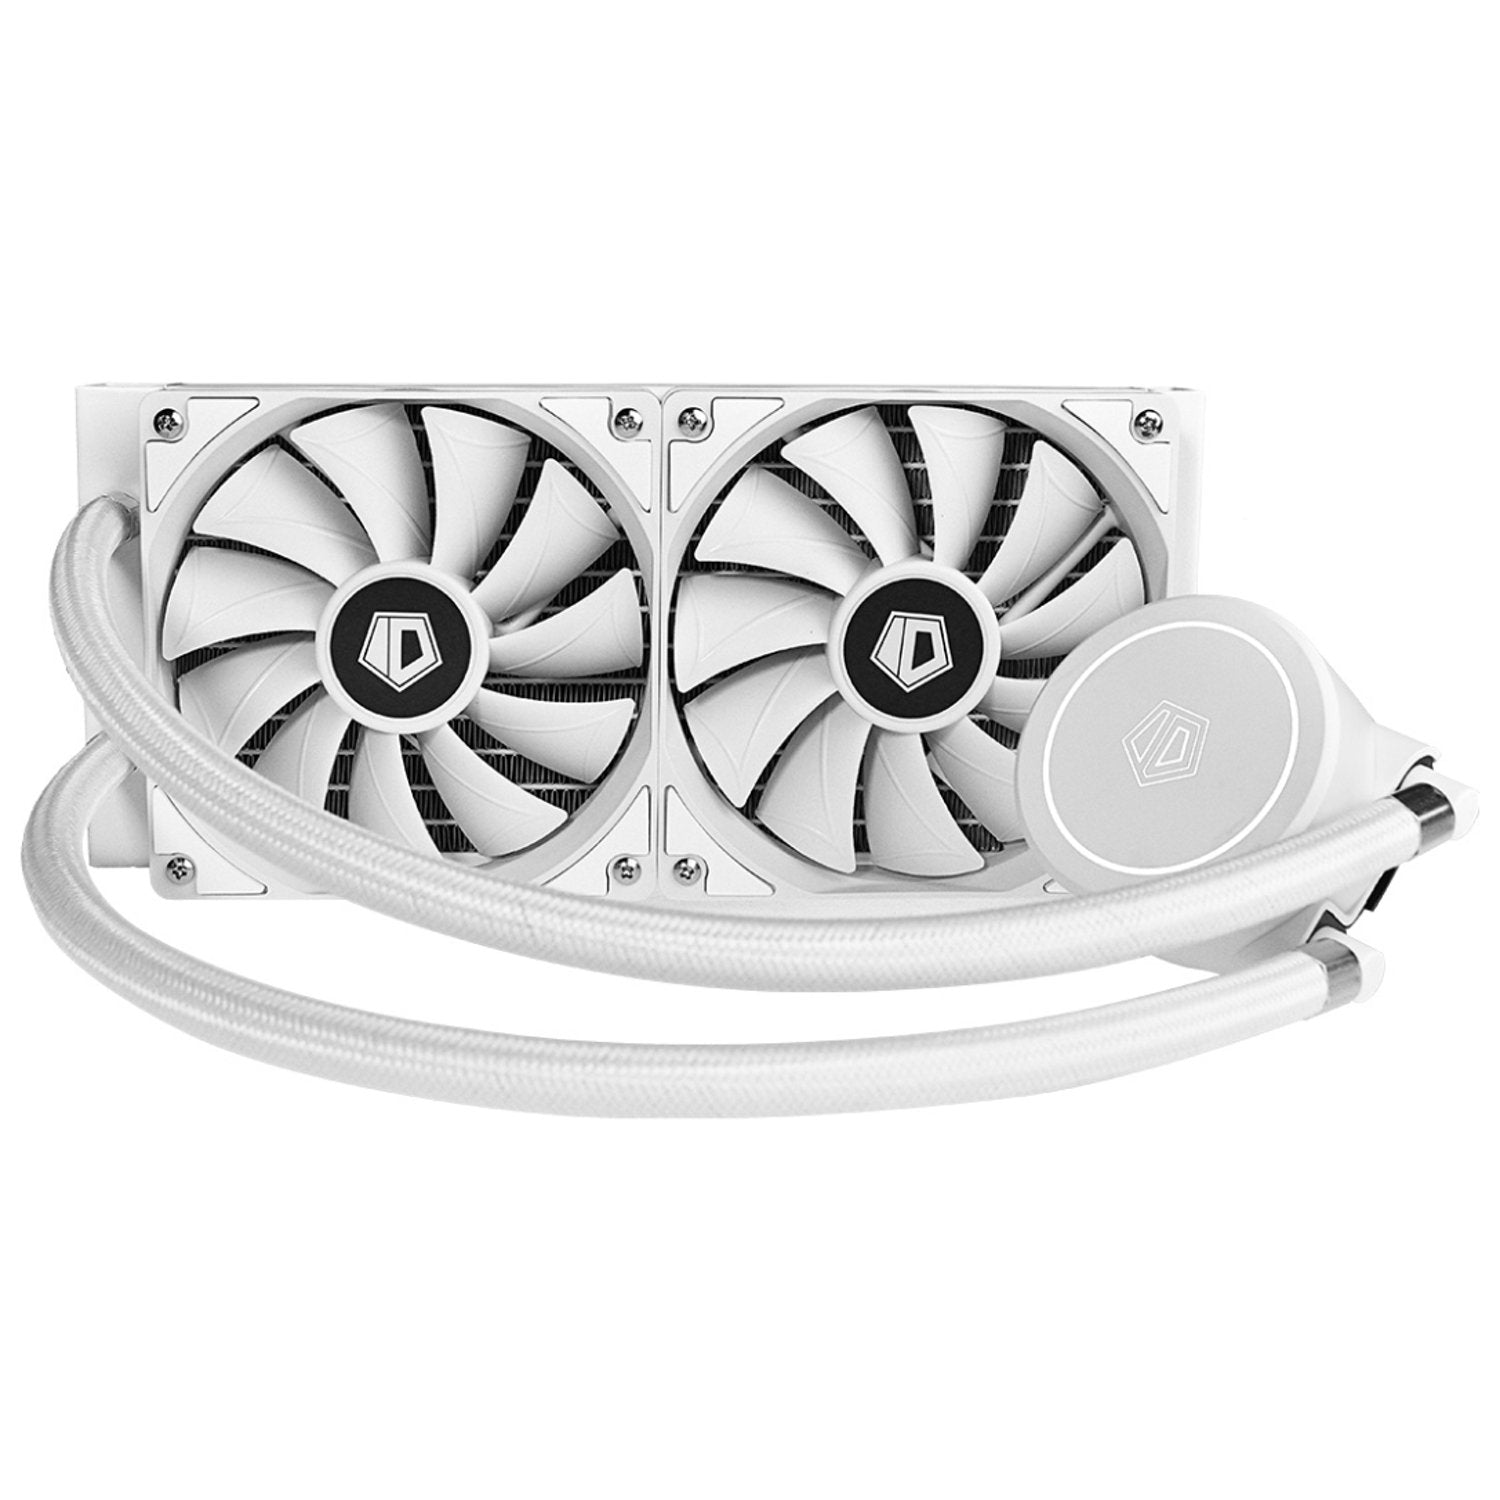 ID-COOLING FrostFlow X 240 Lite SNOW AIO CPU Liquid Cooler - I Gaming Computer | Australia Wide Shipping | Buy now, Pay Later with Afterpay, Klarna, Zip, Latitude & Paypal